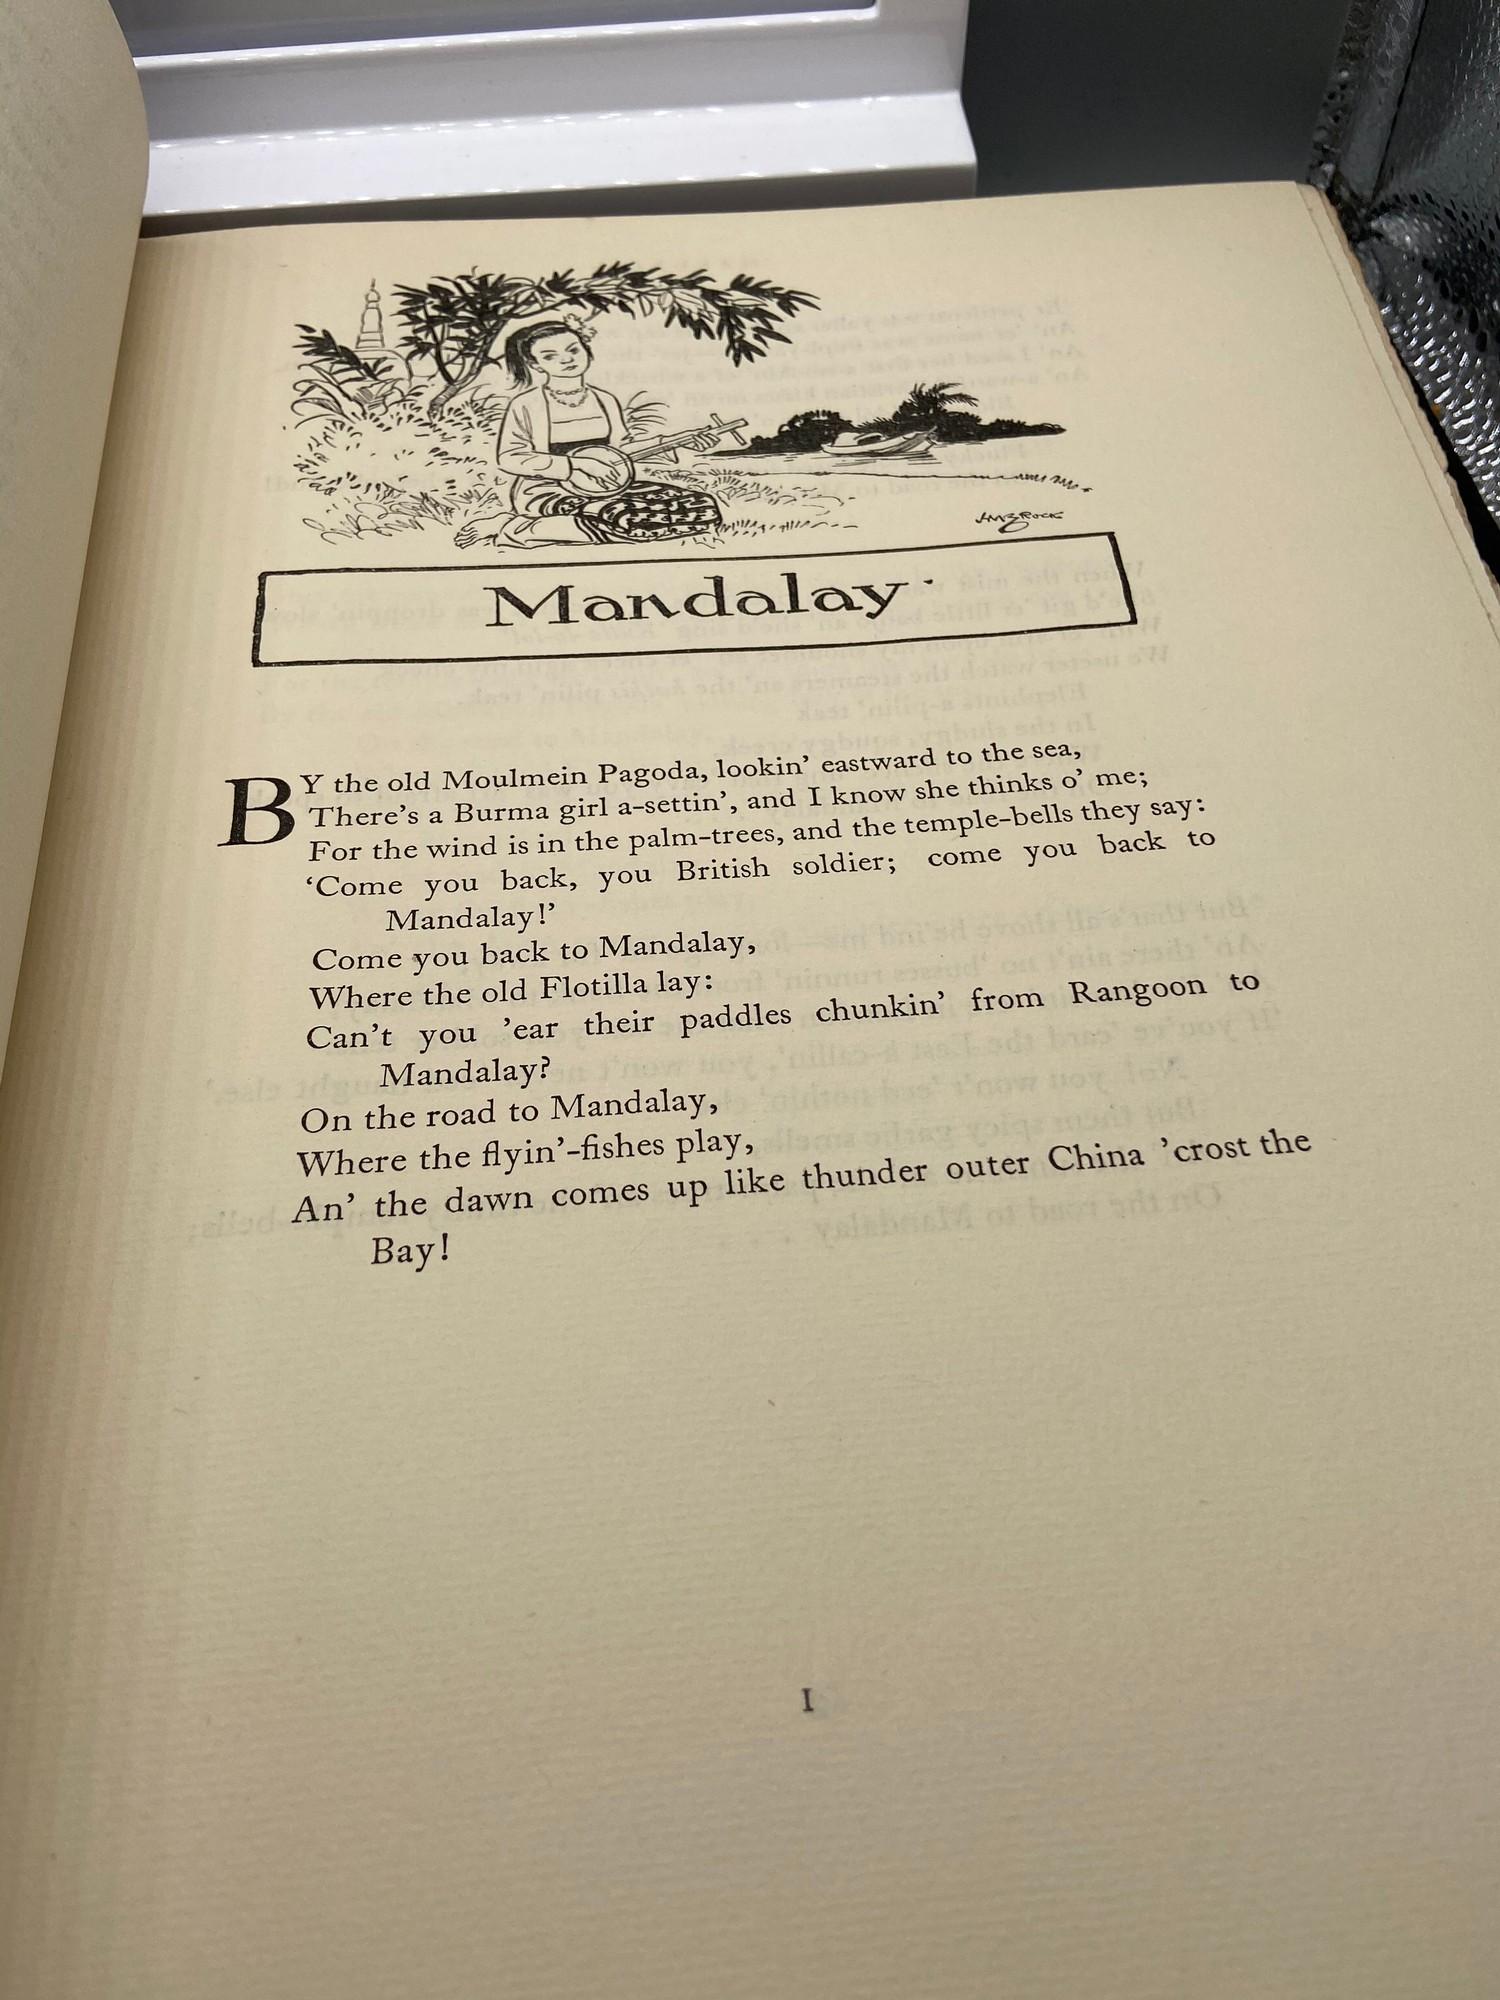 A 1st Edition book of old ballads selected and with an introduction by Beverley Nichols. - Image 6 of 8